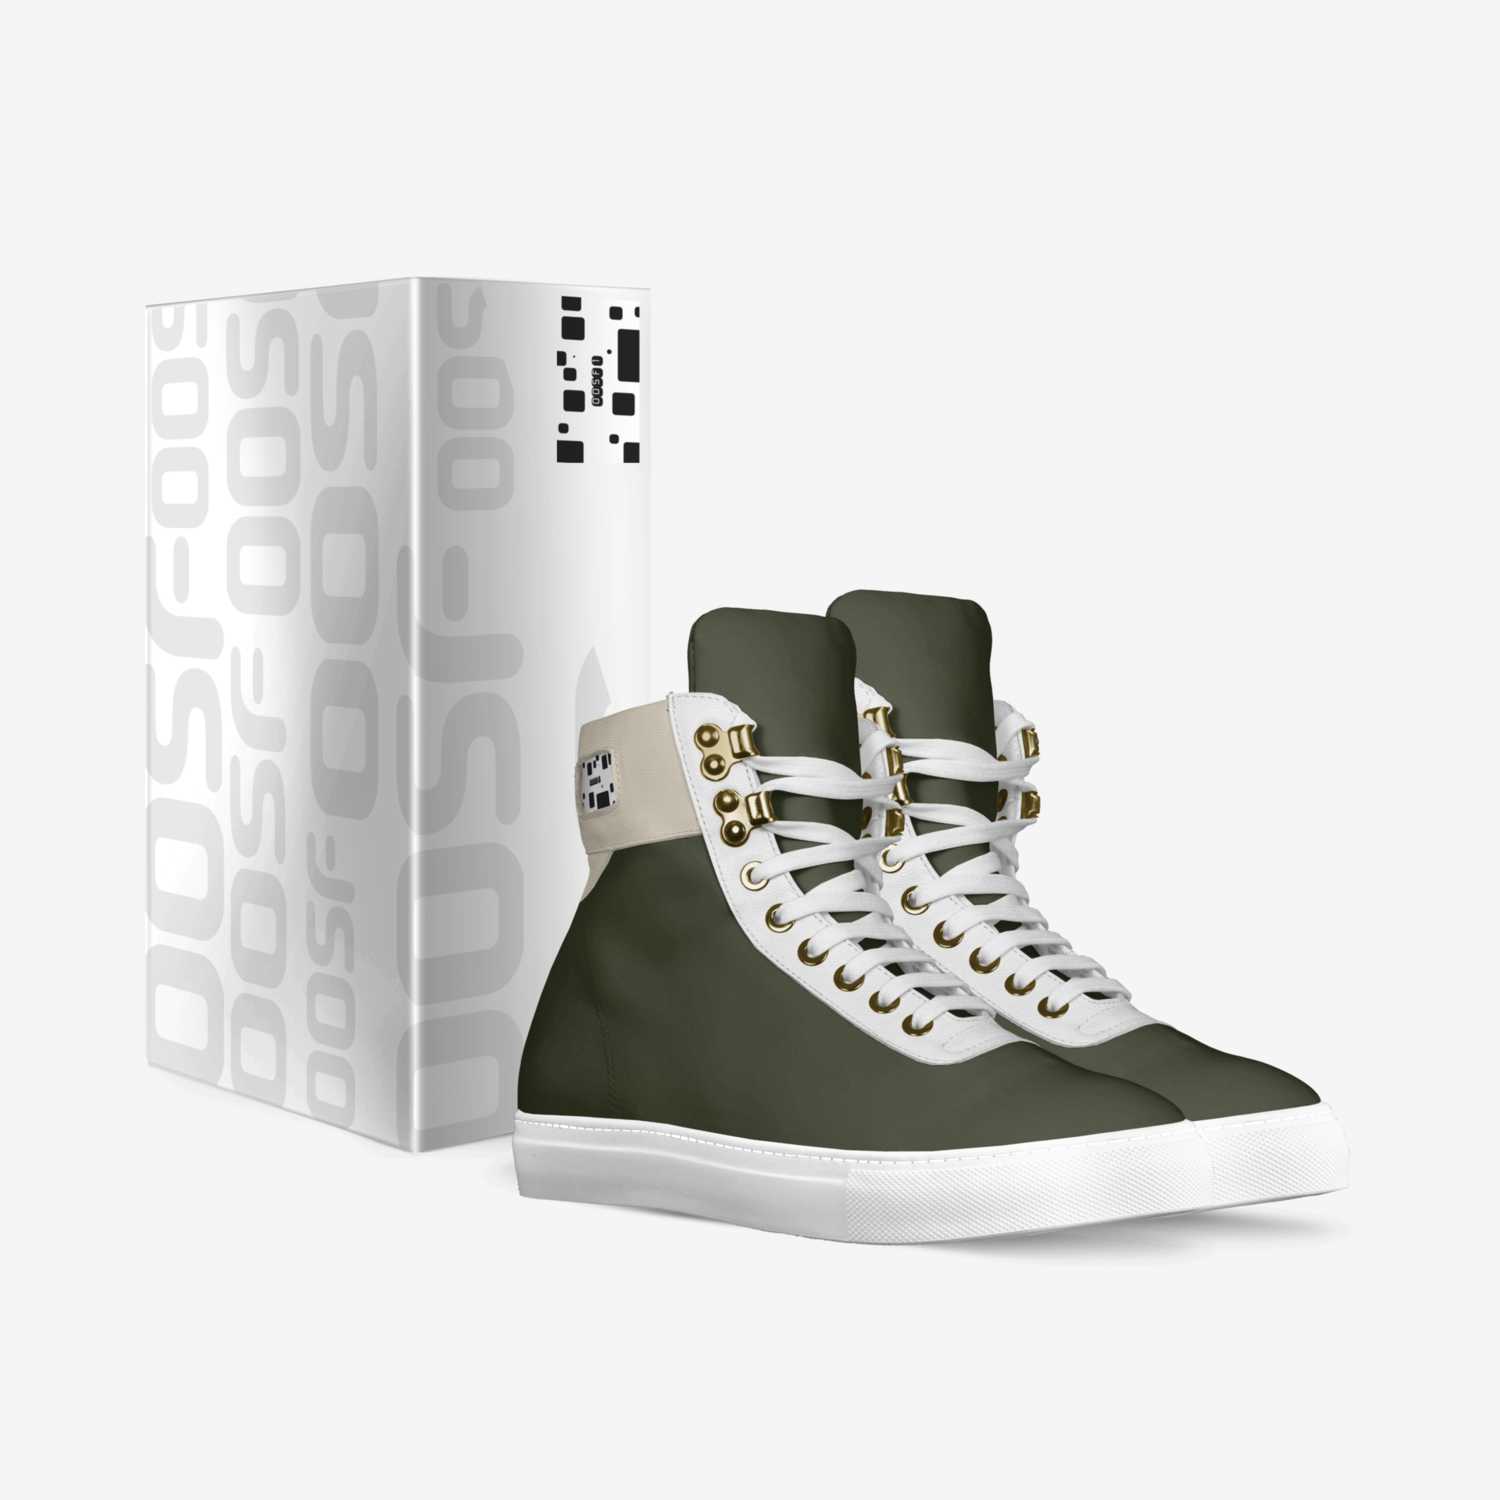 OOSF 1 custom made in Italy shoes by Dwayne Bester | Box view